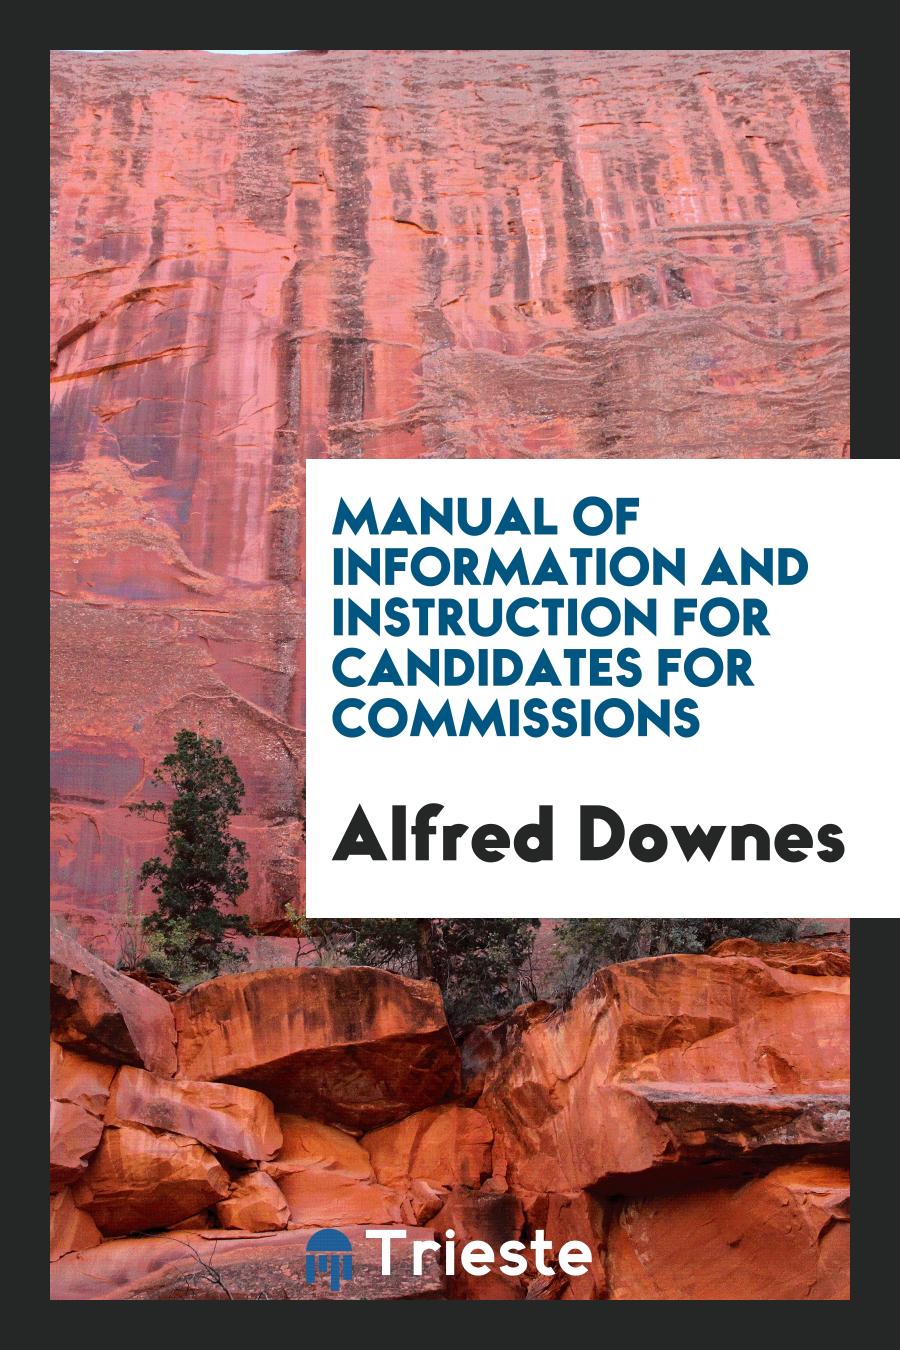 Manual of Information and Instruction for Candidates for Commissions